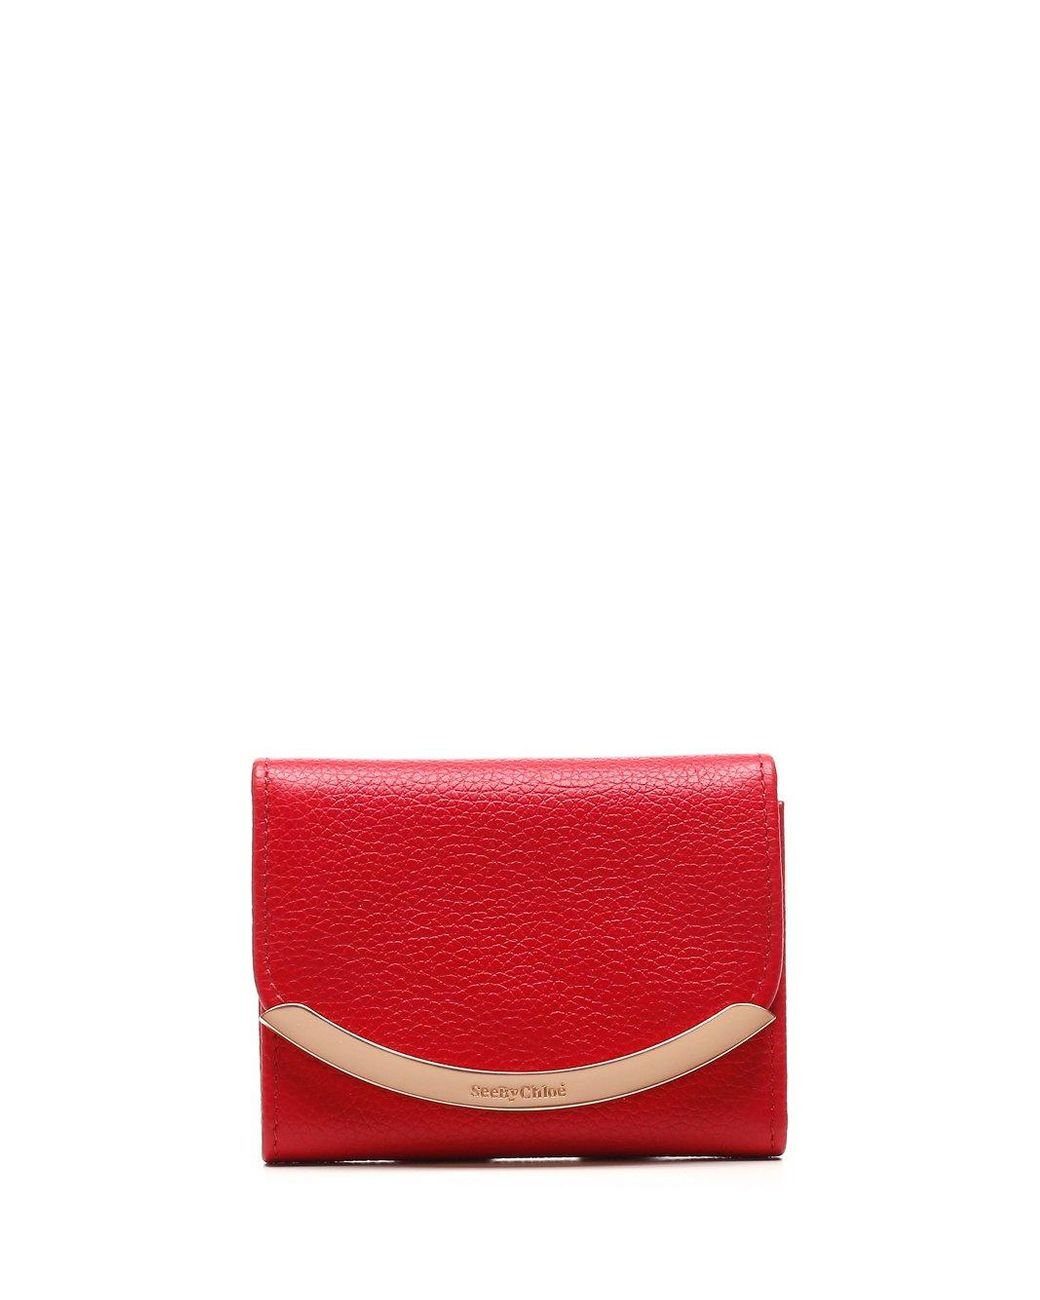 See By Chloé Leather Lizzie Compact Wallet in Red - Lyst